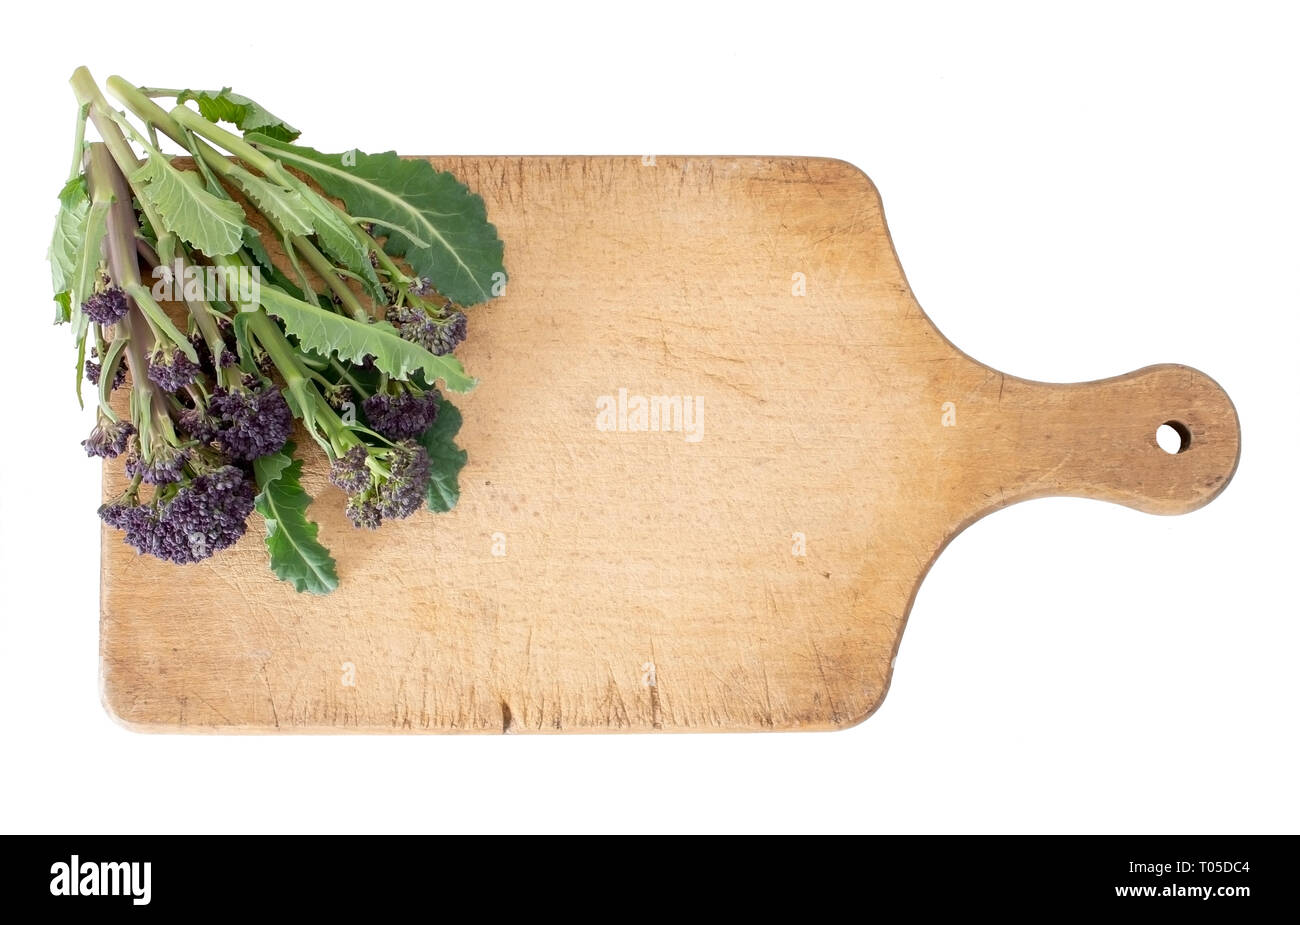 Early purple sprouting broccoli spring vegetable, with wooden food cutting board. Isolated on white. Overhead view. Stock Photo